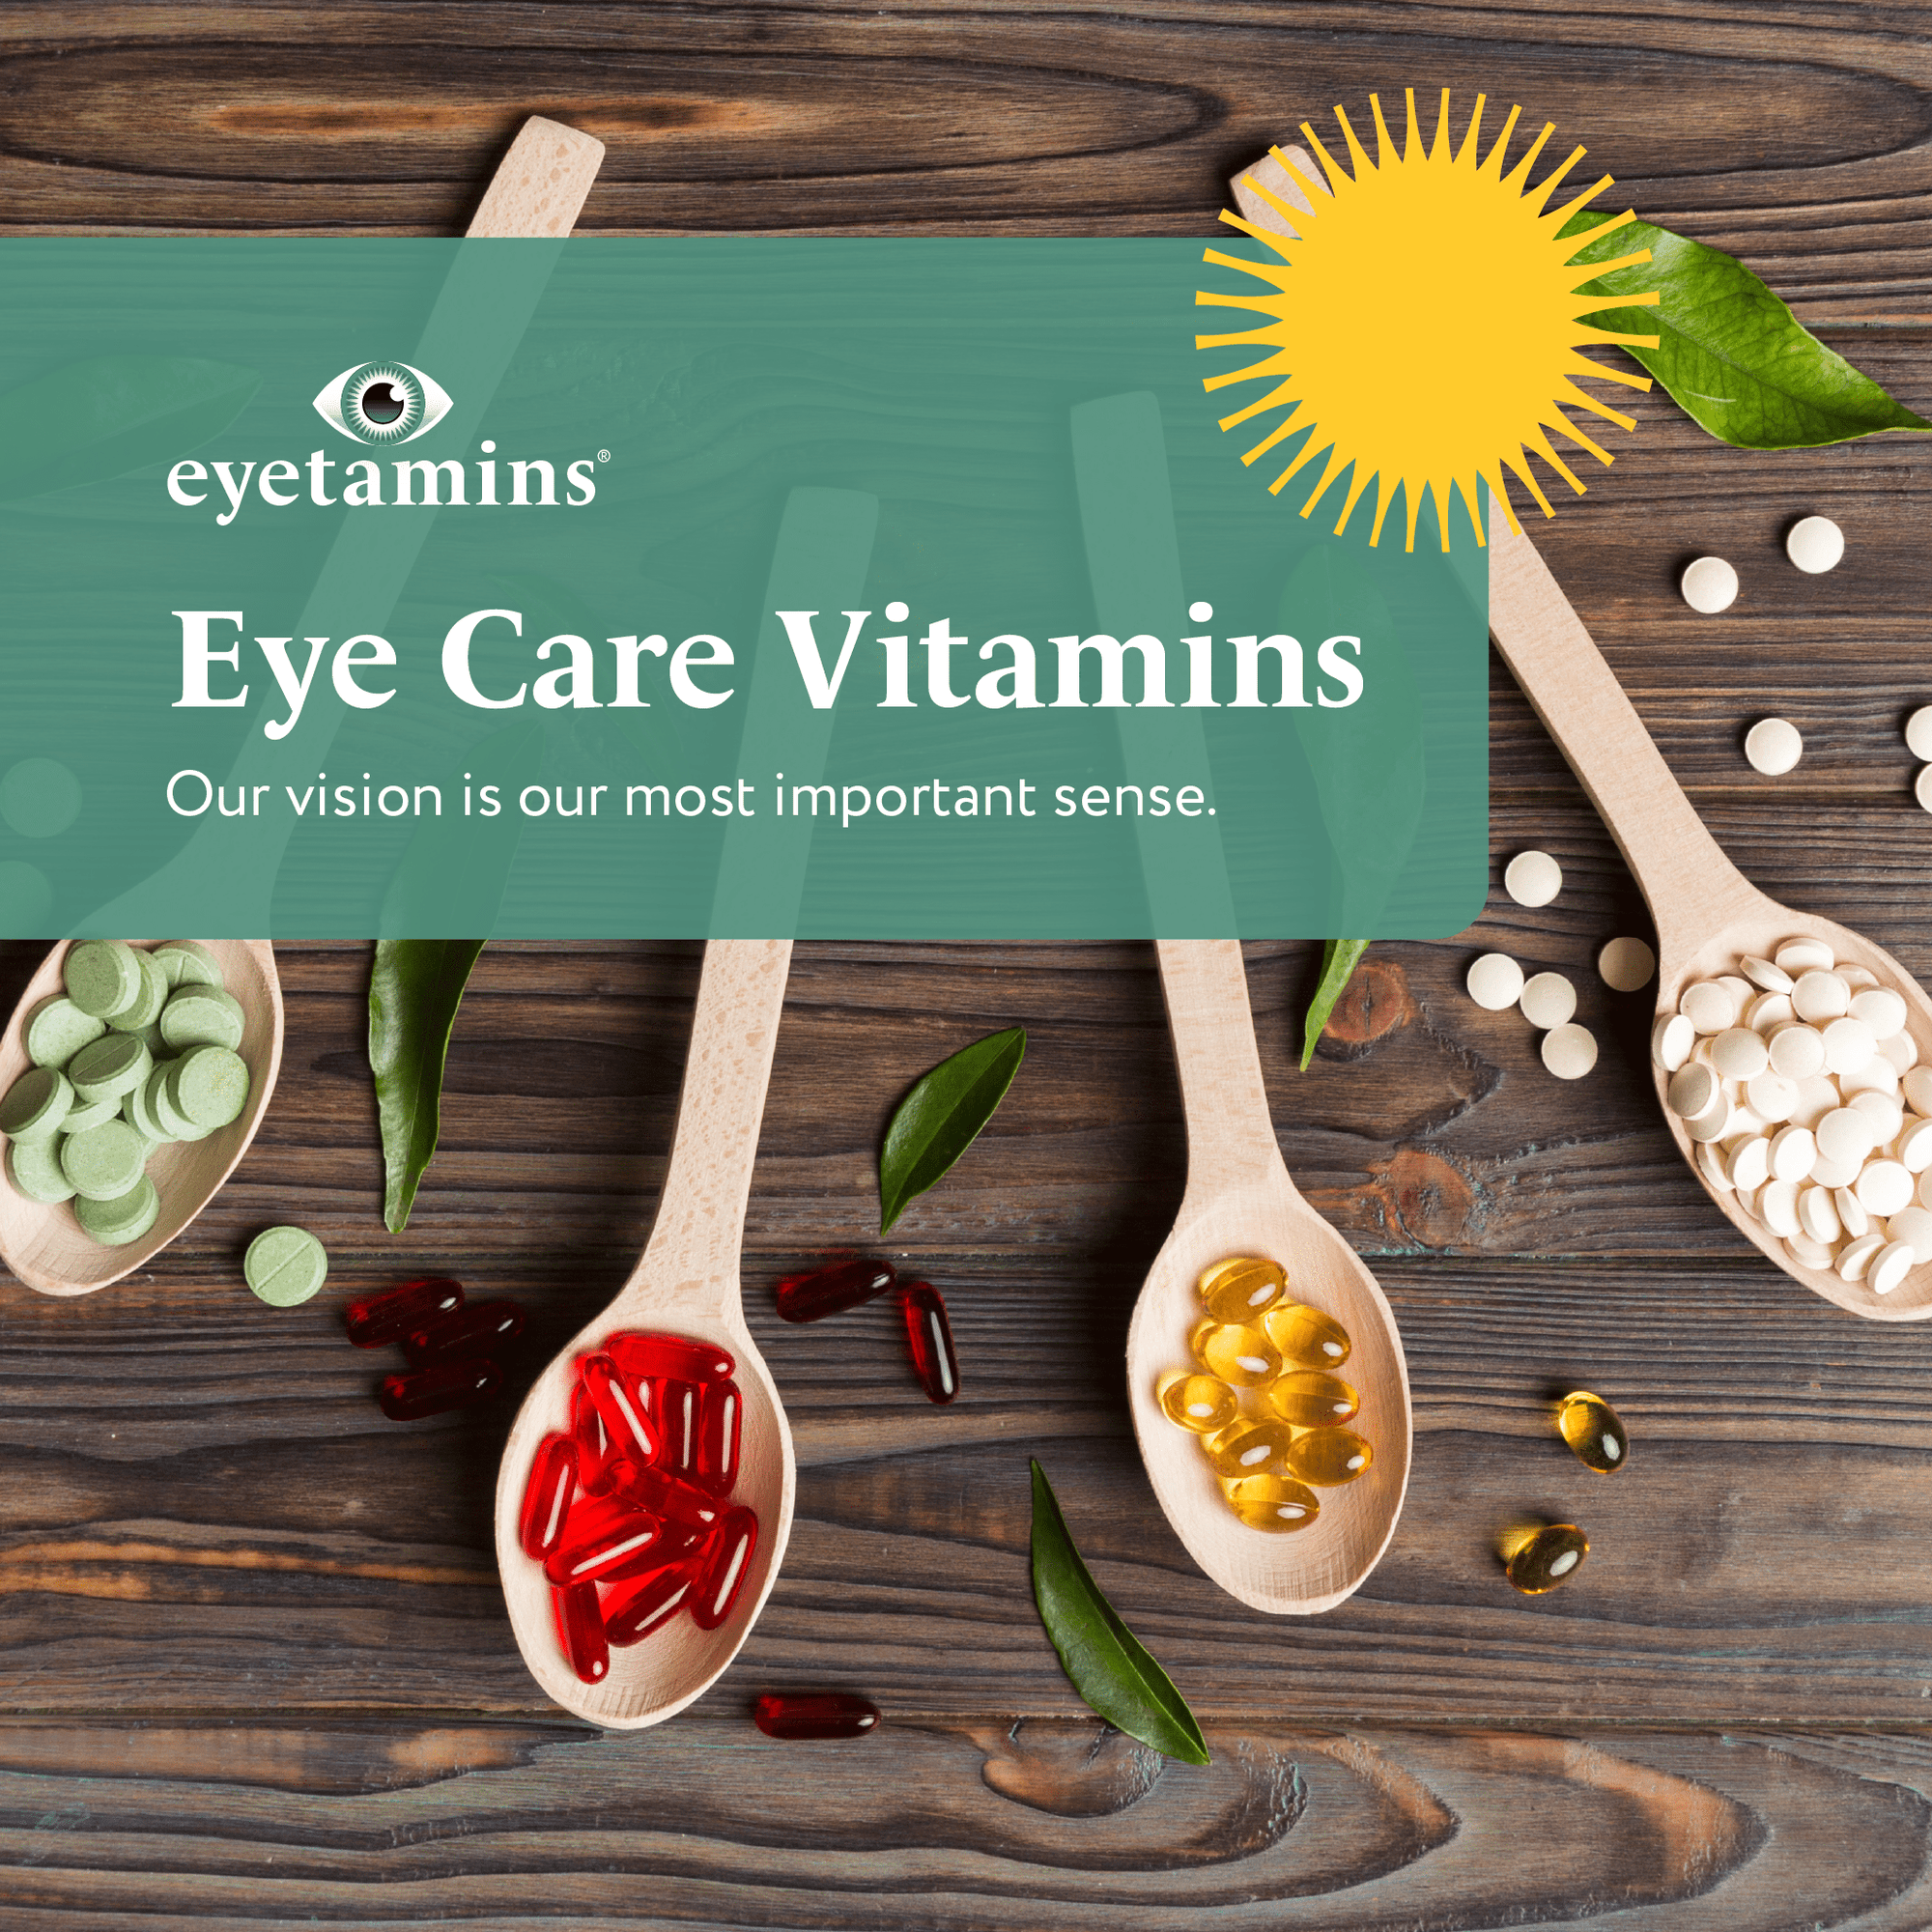 Eye Care Vitamins - Our sight is our most important sense.